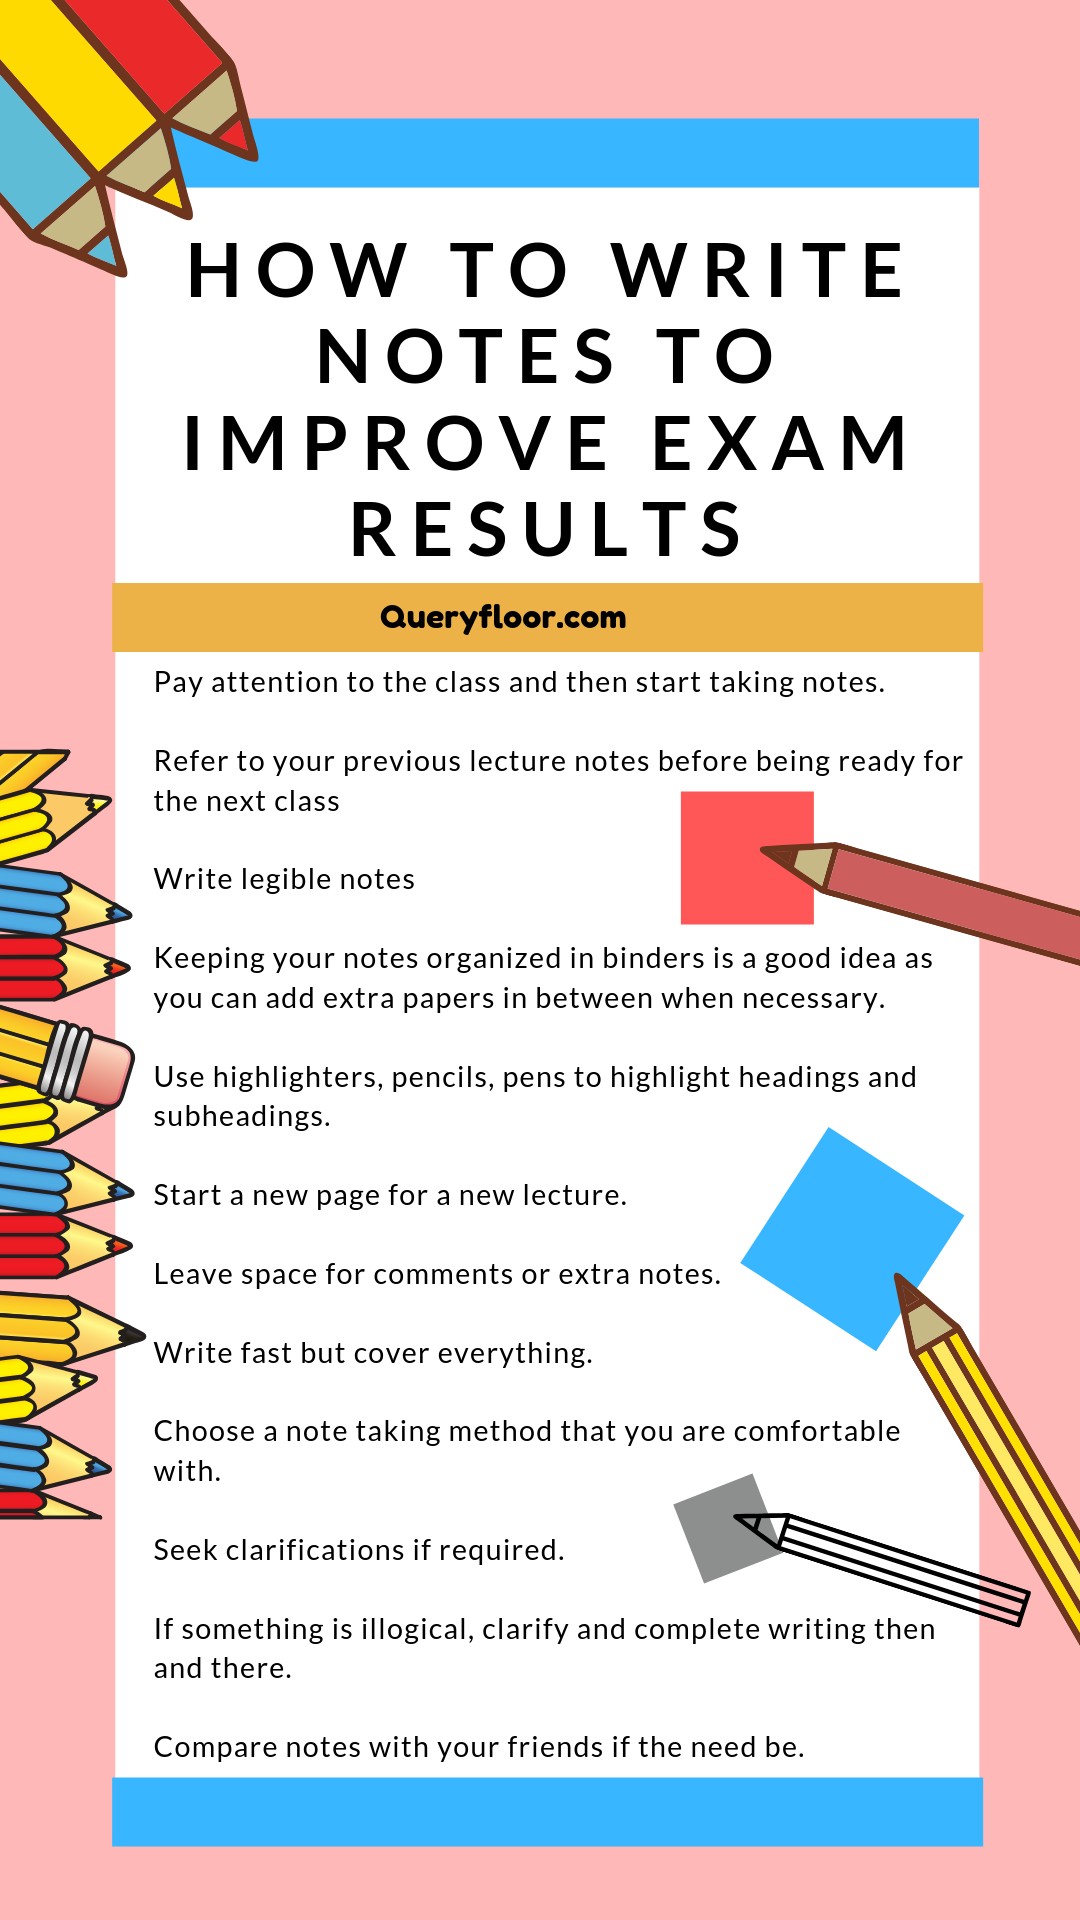 How to write notes for improve exam results?